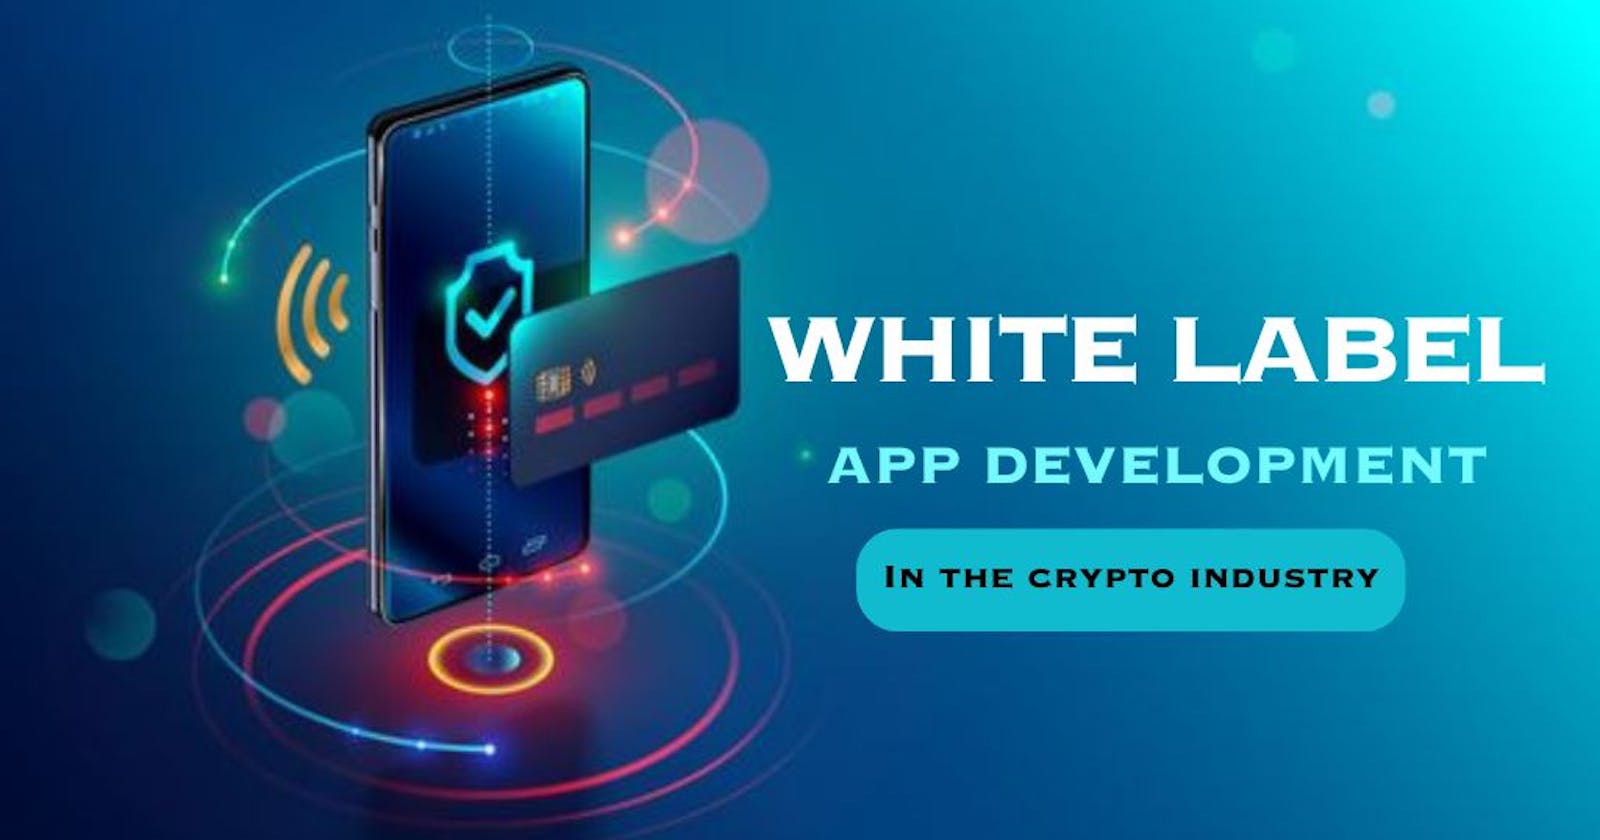 Advantages of White Label App Development in the Crypto Industry